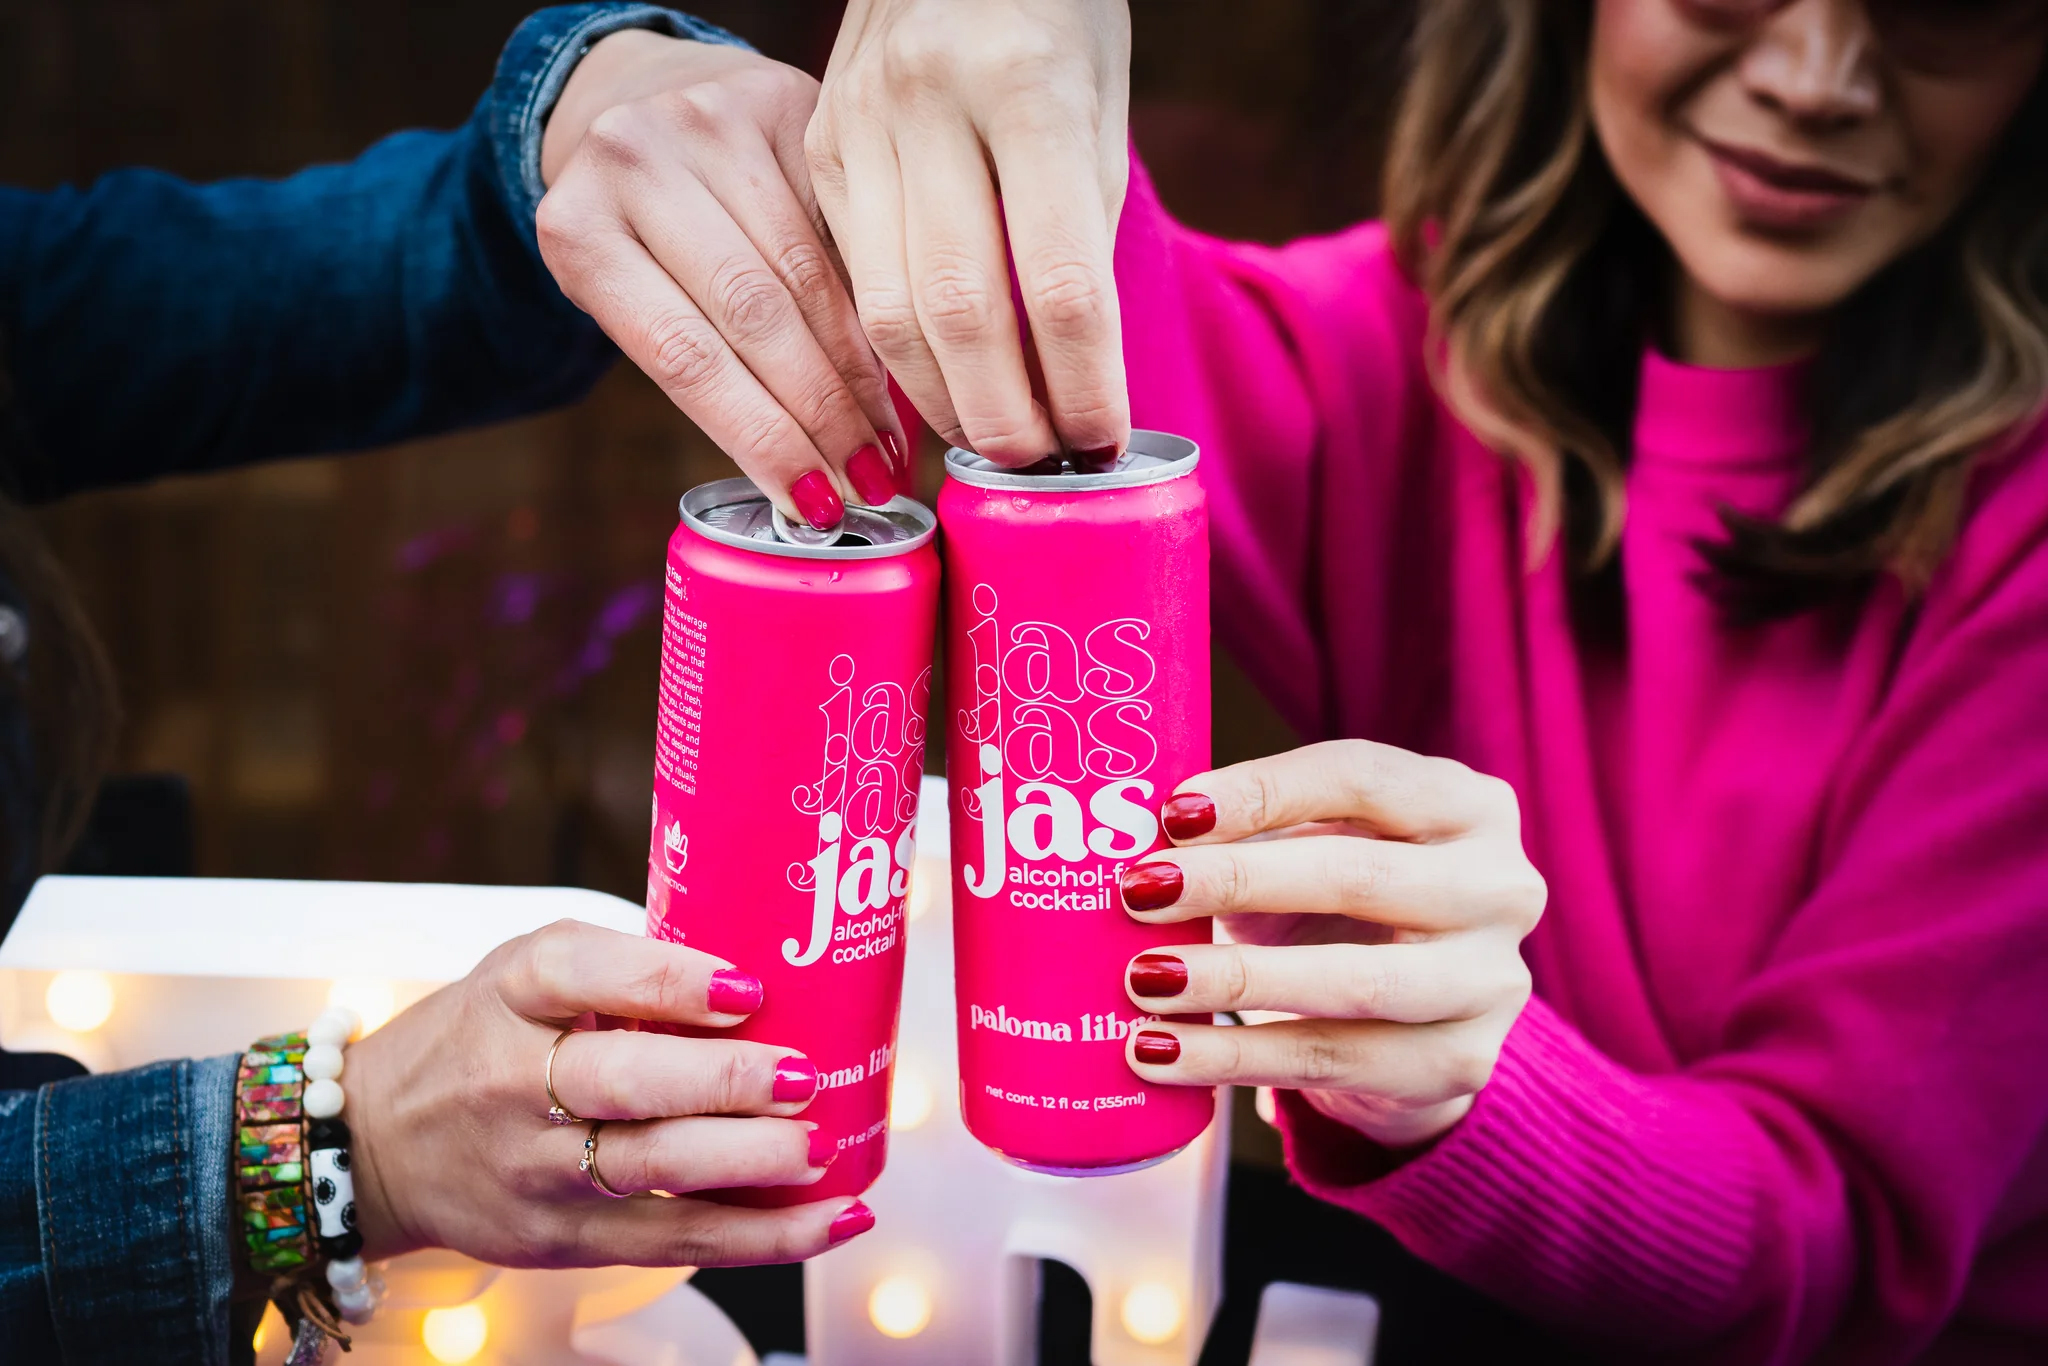 A close up of JAS drinks in pink cans being opened by two women.